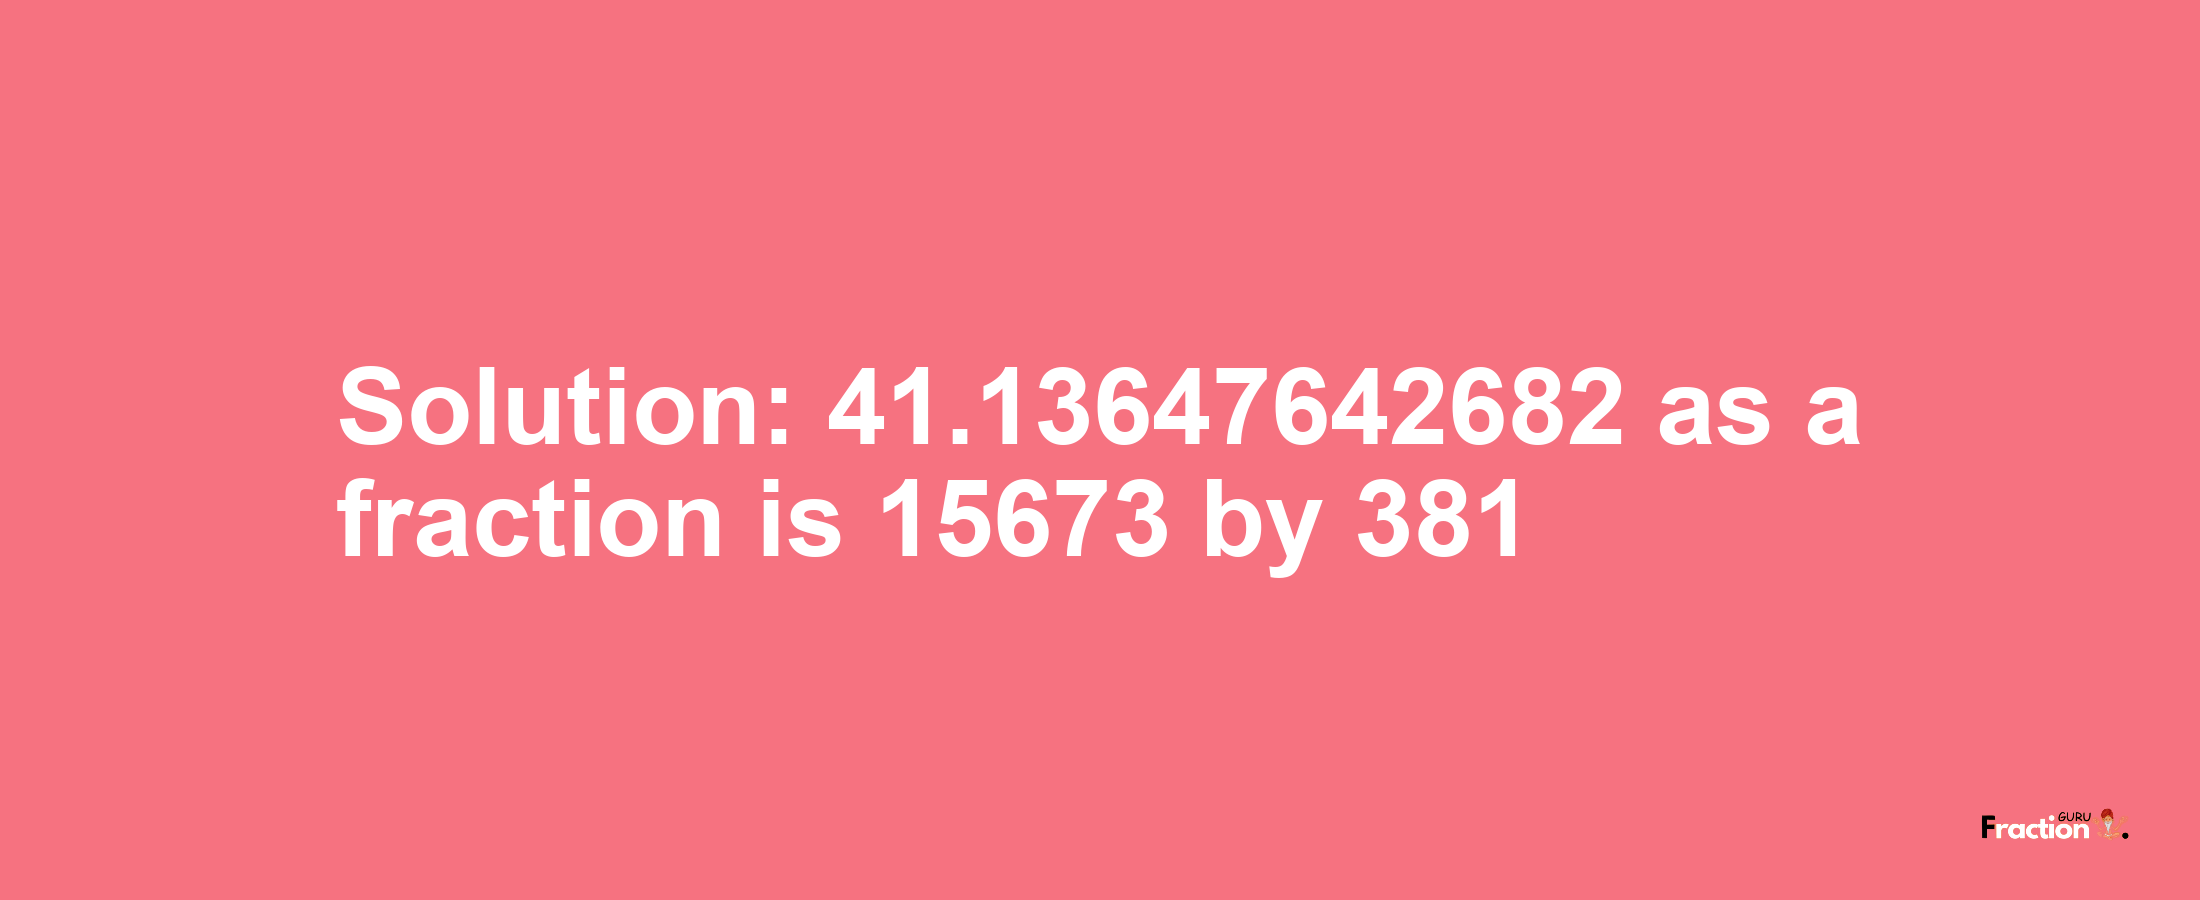 Solution:41.13647642682 as a fraction is 15673/381